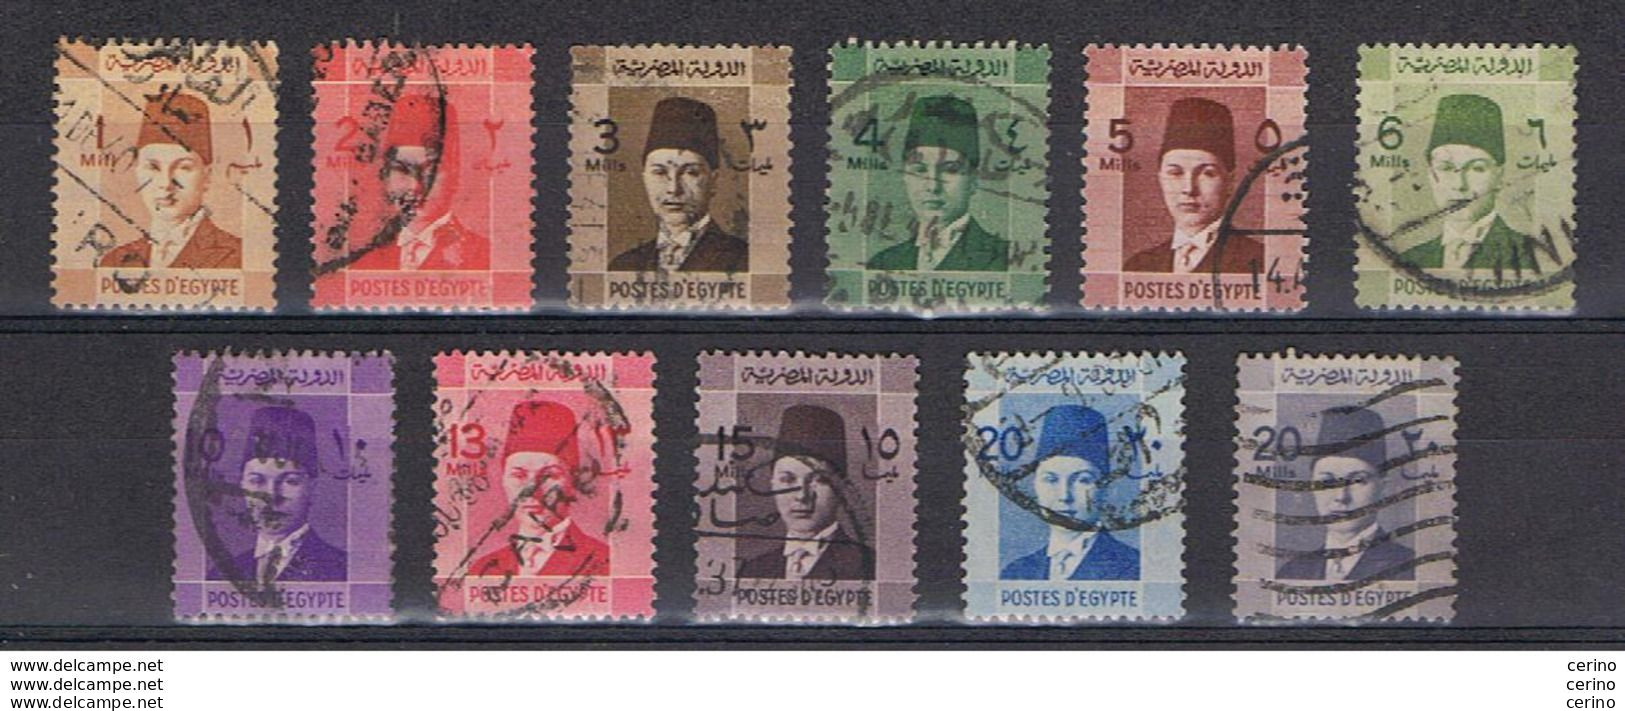 EGYPT:  1937/44  FAROUK  -  KOMPLET  SET  11  USED  STAMPS  -  YV/TELL. 187/95 A - Gebraucht